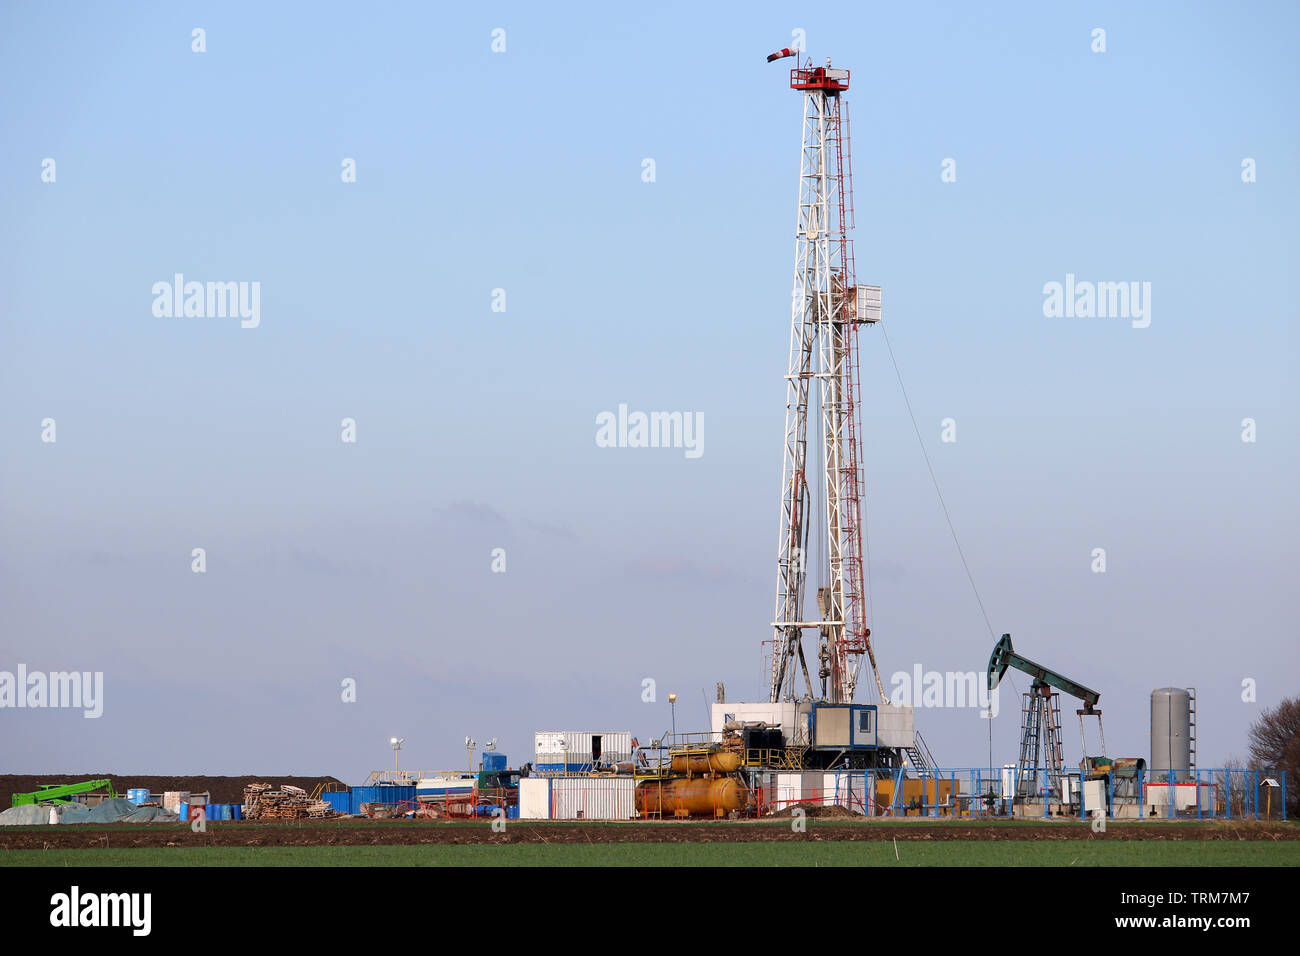 Oil and gas drilling rig and pump jack in oilfield industry Stock Photo